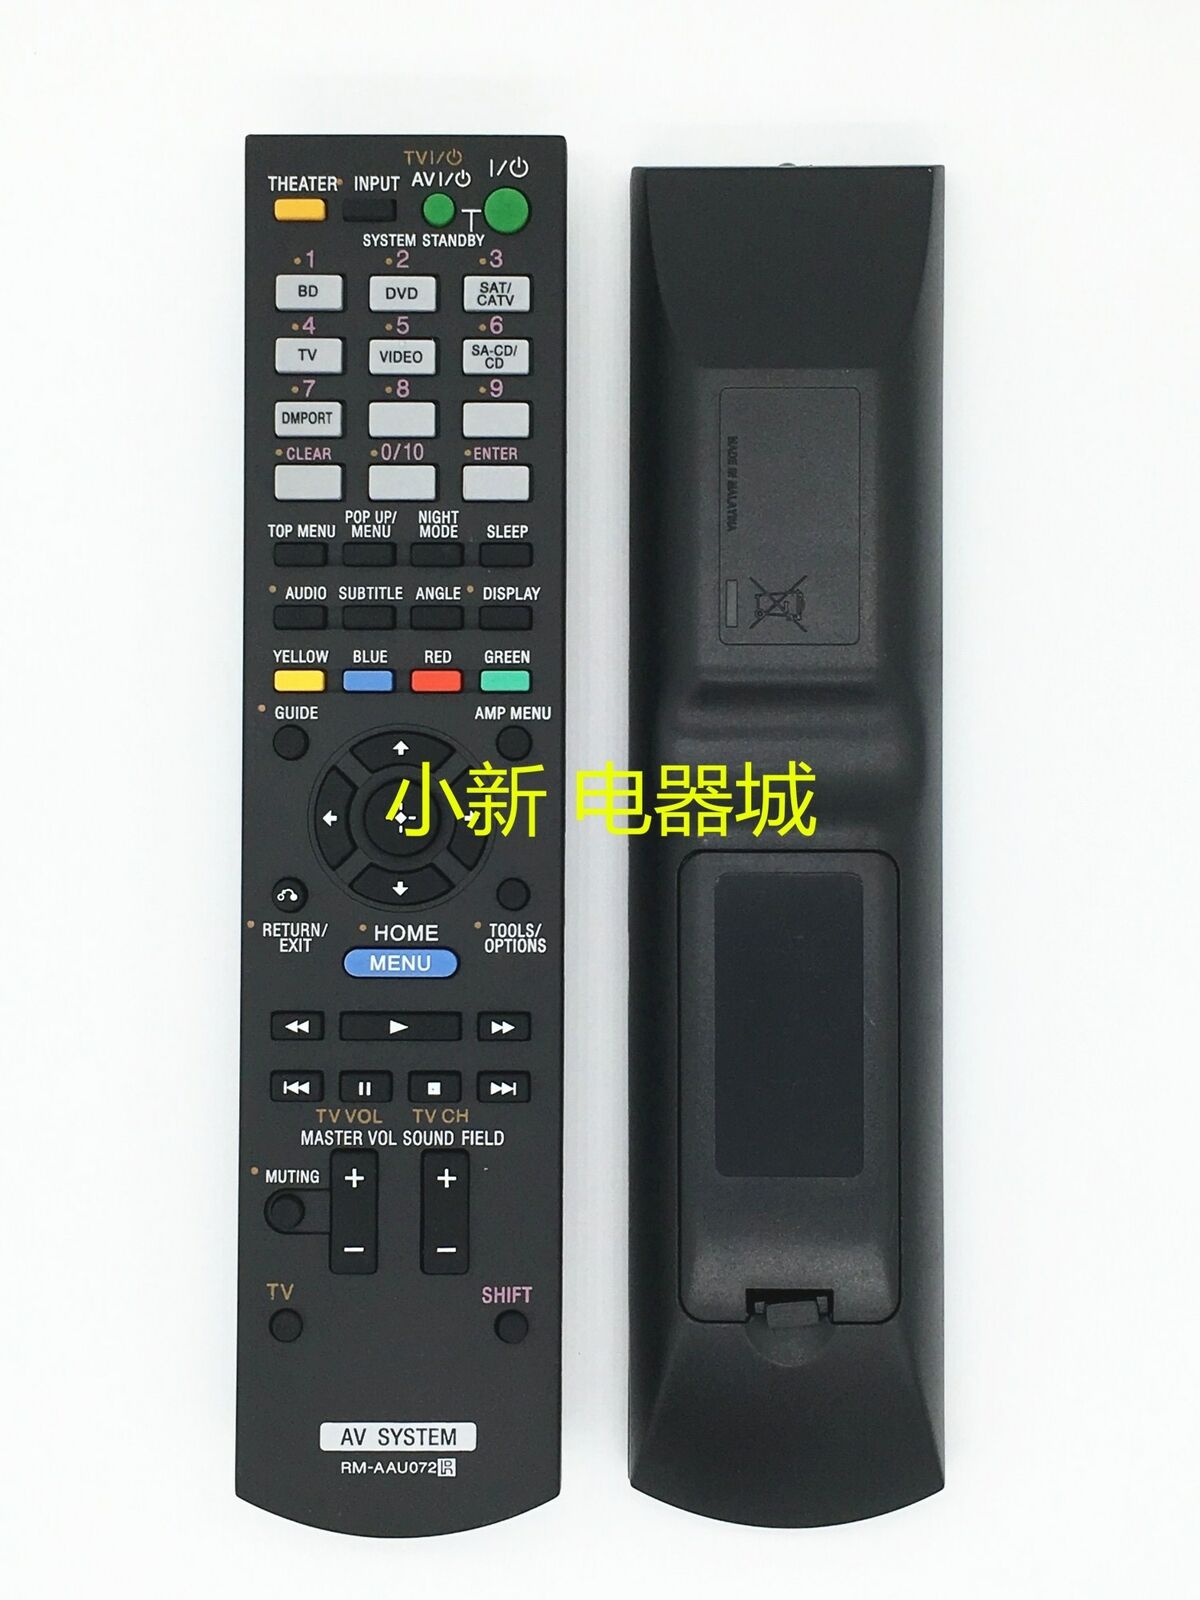 Remote Control for Sony Video Audio SA-WCT150 HT-CT150 HTCT350 Brand: Sony Type: Remote Control Model: RM-AAU072